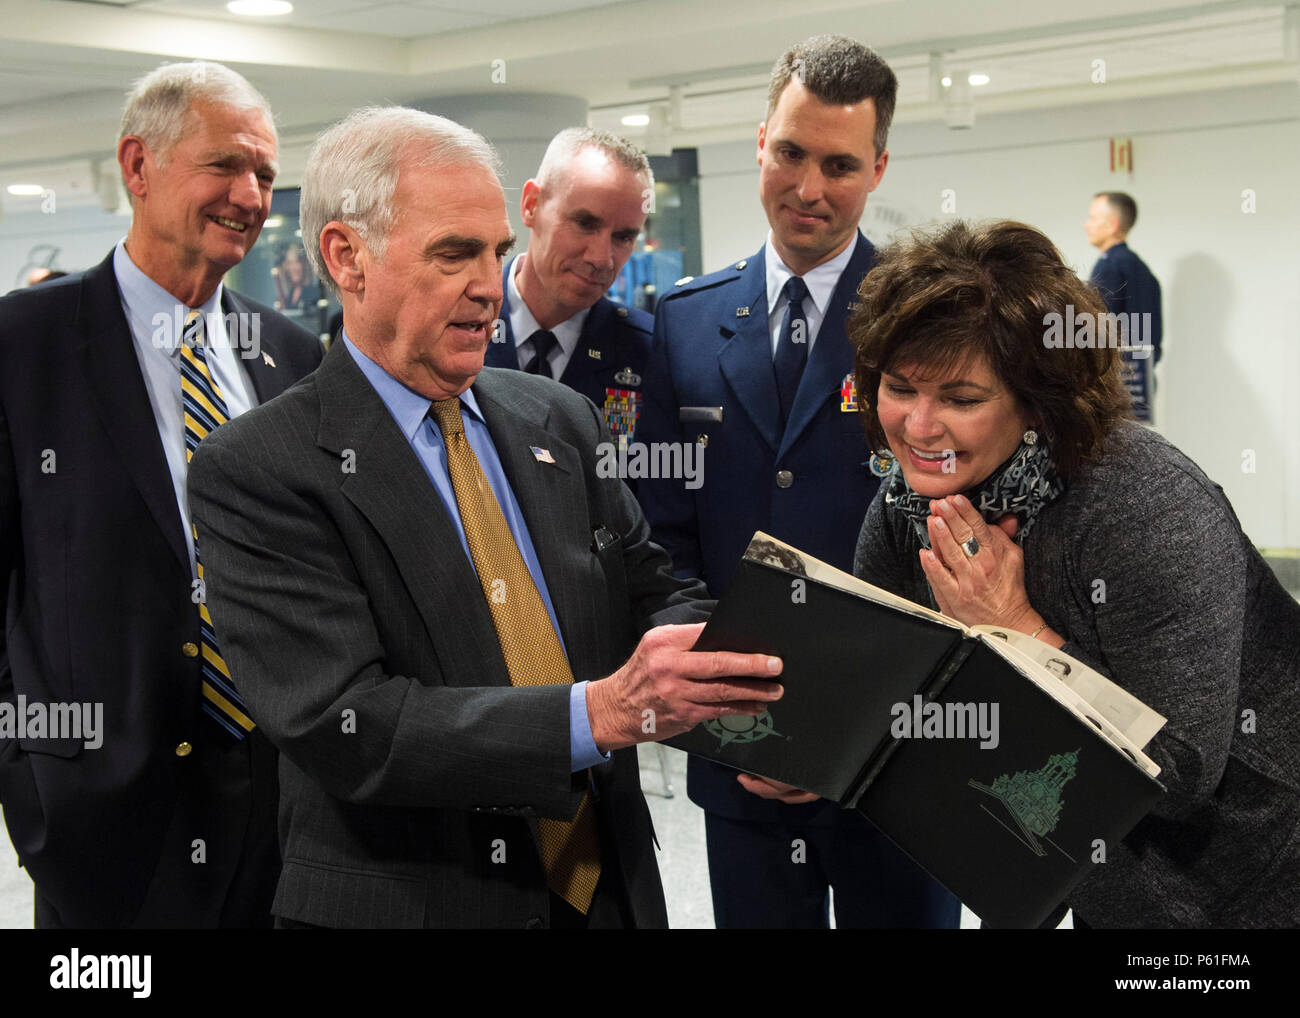 Following A Ceremony In The Pentagon Ms Janine Rozina The Sister Of Lance P Sijan Looks At Photos Of Her Brother Being Shown To Her By One Her Brother S Air Force Academy